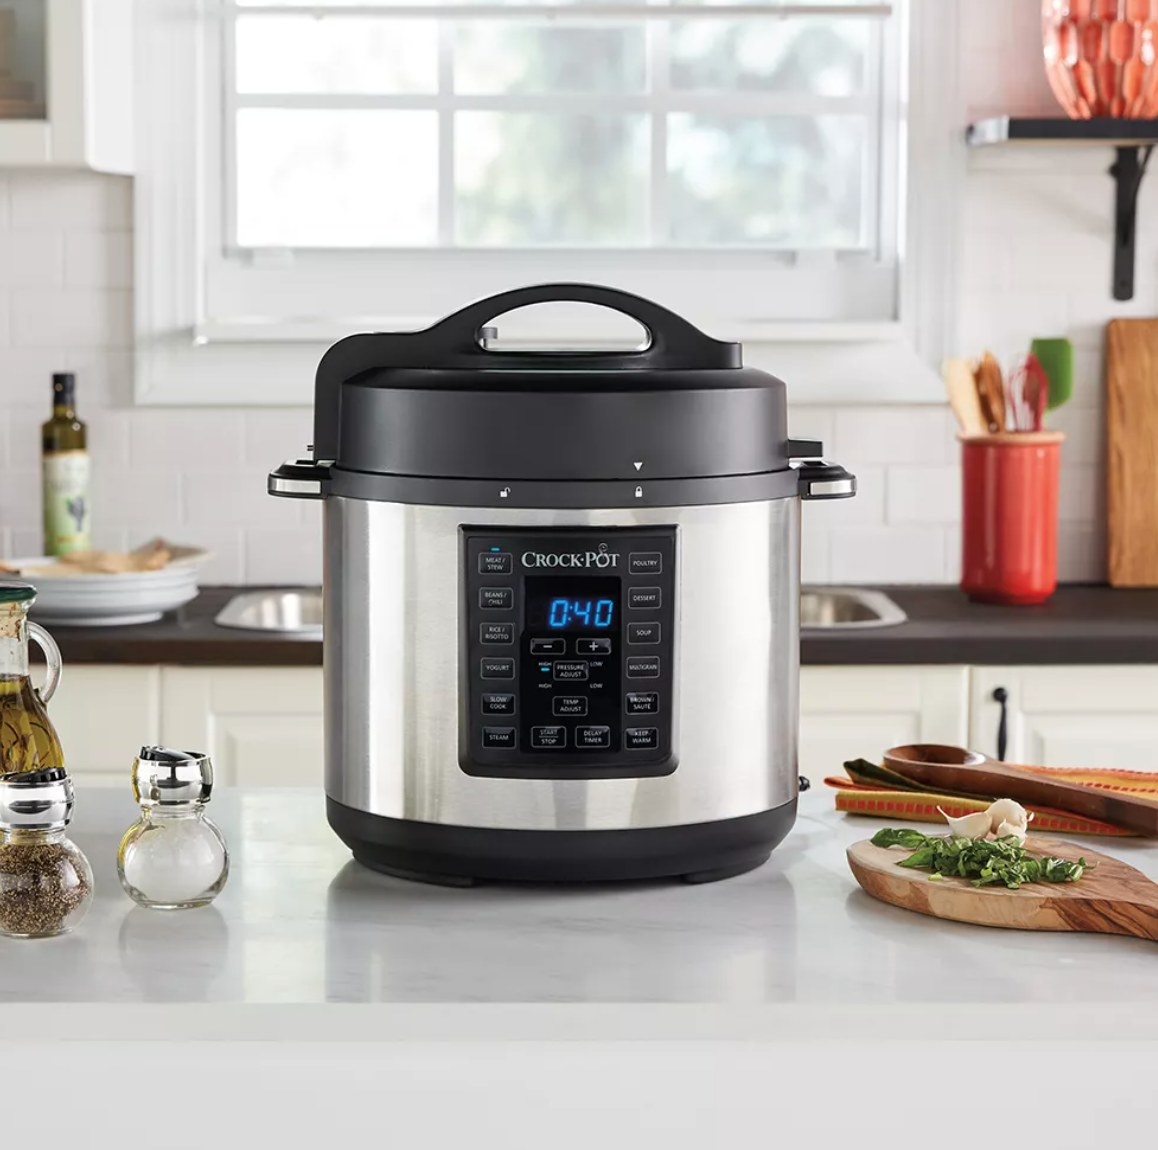 The black and silver InstantPot